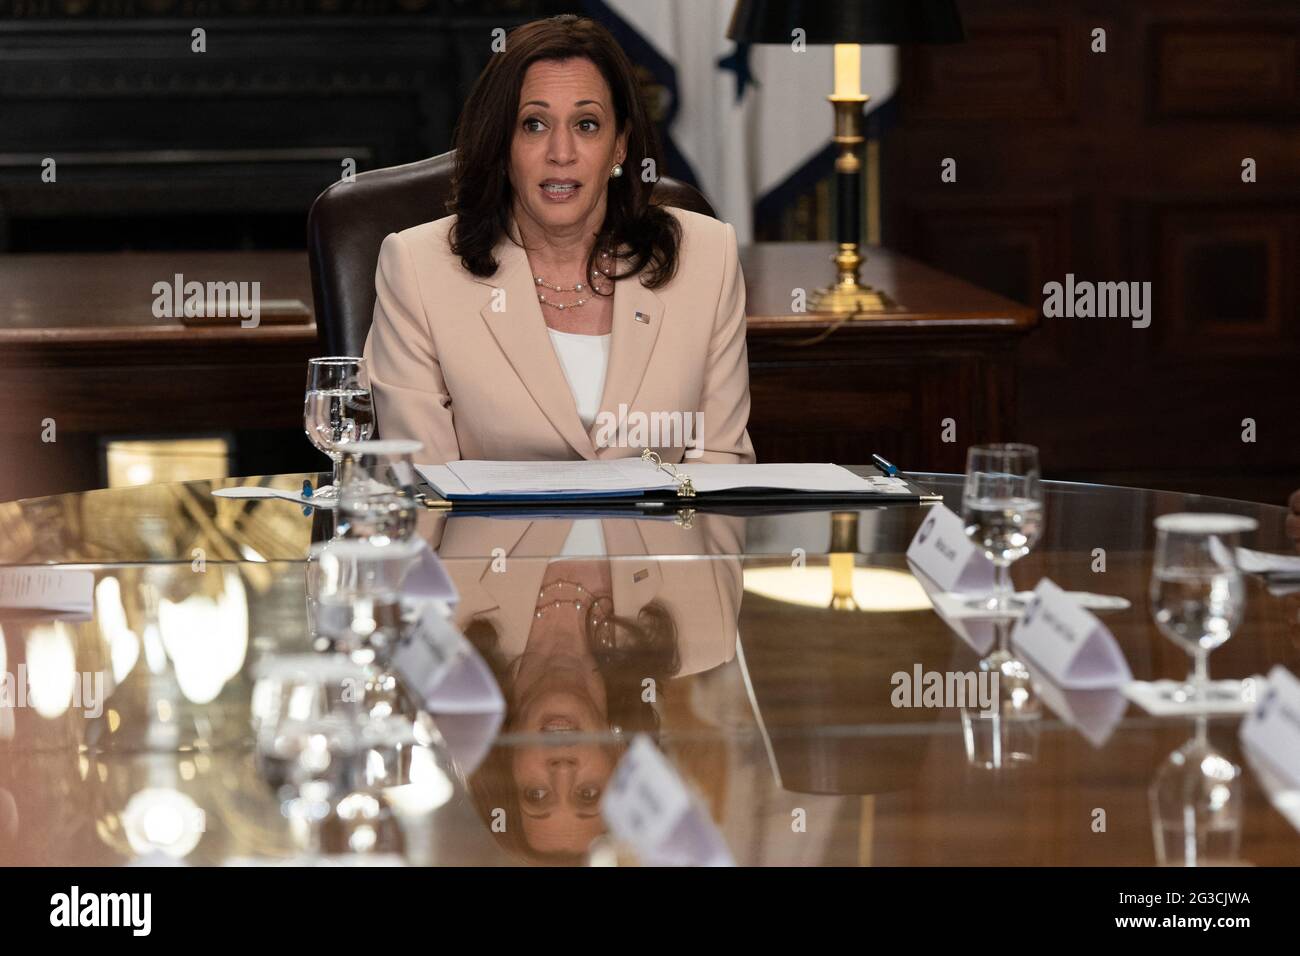 United States Vice President Kamala Harris holds a meeting to mark the ninth anniversary of the creation of Deferred Action for Childhood Arrivals(DACA) in the Vice President's Ceremonial Office in the Eisenhower Executive Office Building in Washington, DC, June 15, 2021. Credit: Chris Kleponis / Pool via CNP Stock Photo